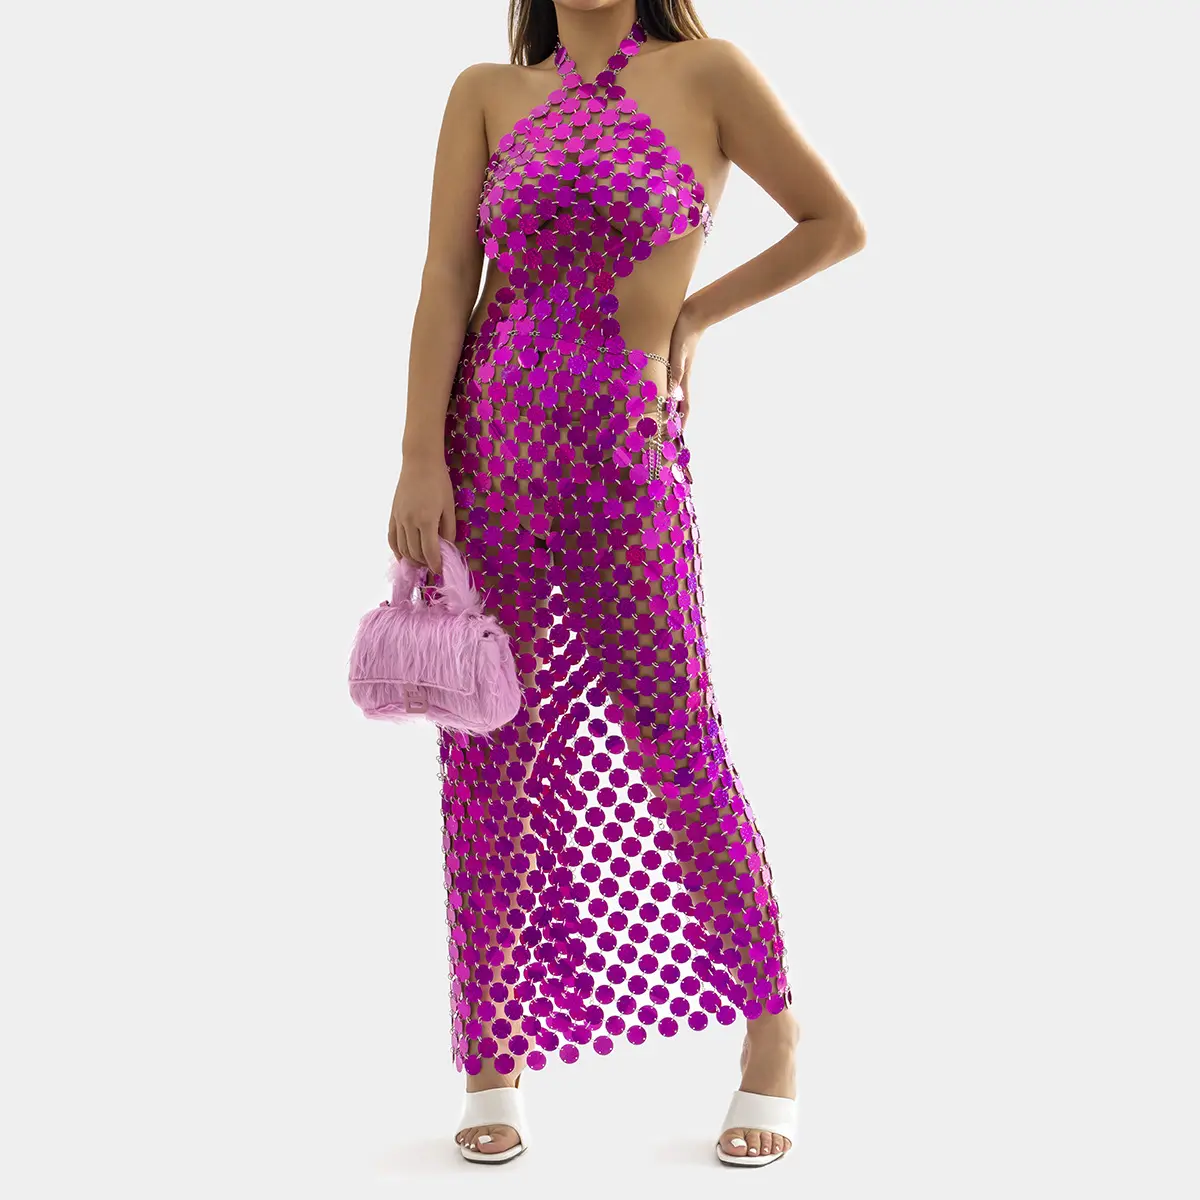 Neon Pink Sexy Cut Out Halter Sequin Long Dresses Women's Metallic Halterneck Chainmail Maxi Dress